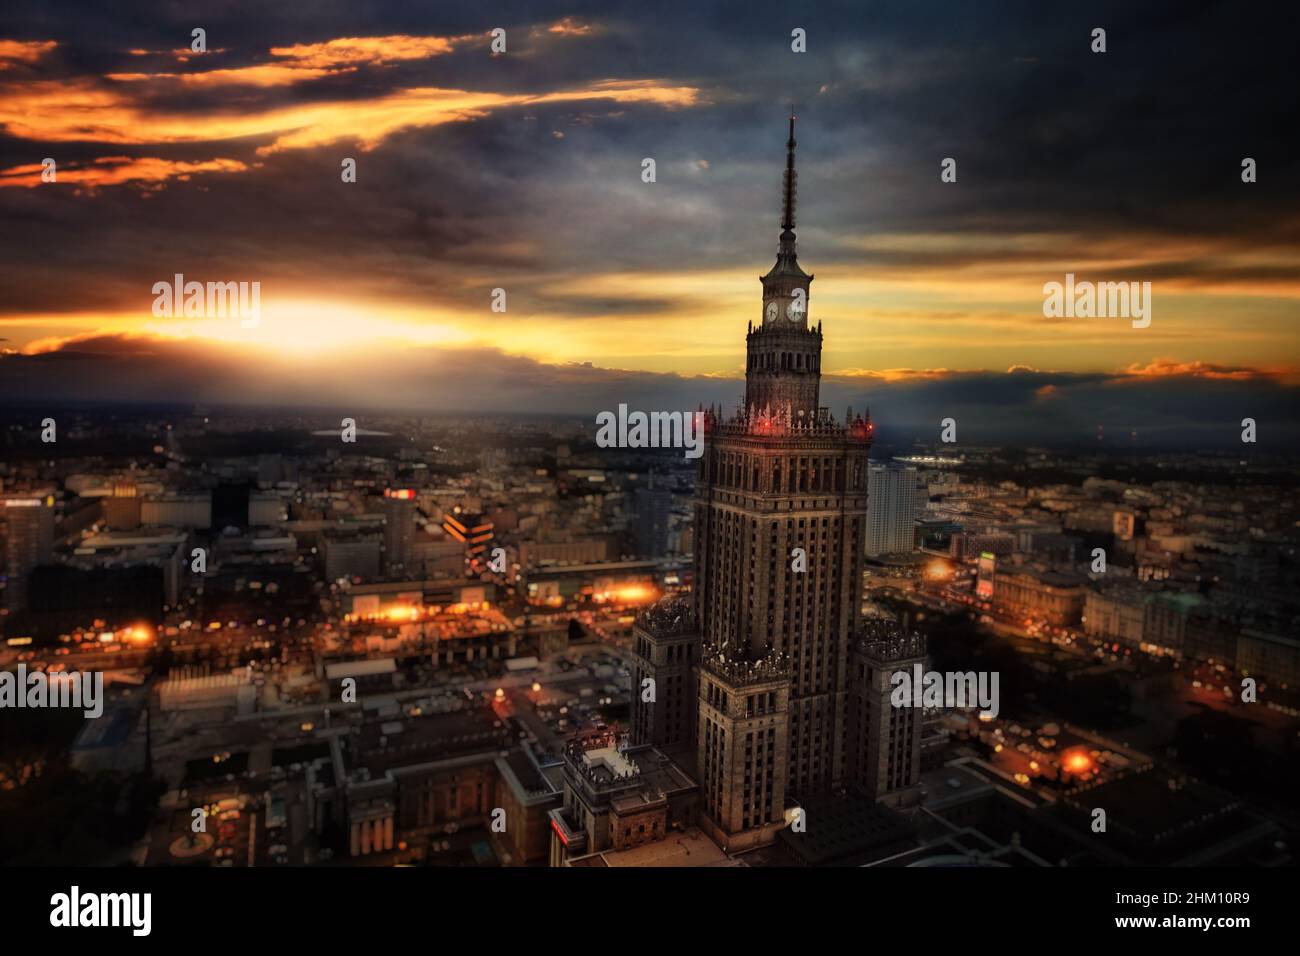 view of the Palace of Culture and Science and the center of Warsaw Stock Photo